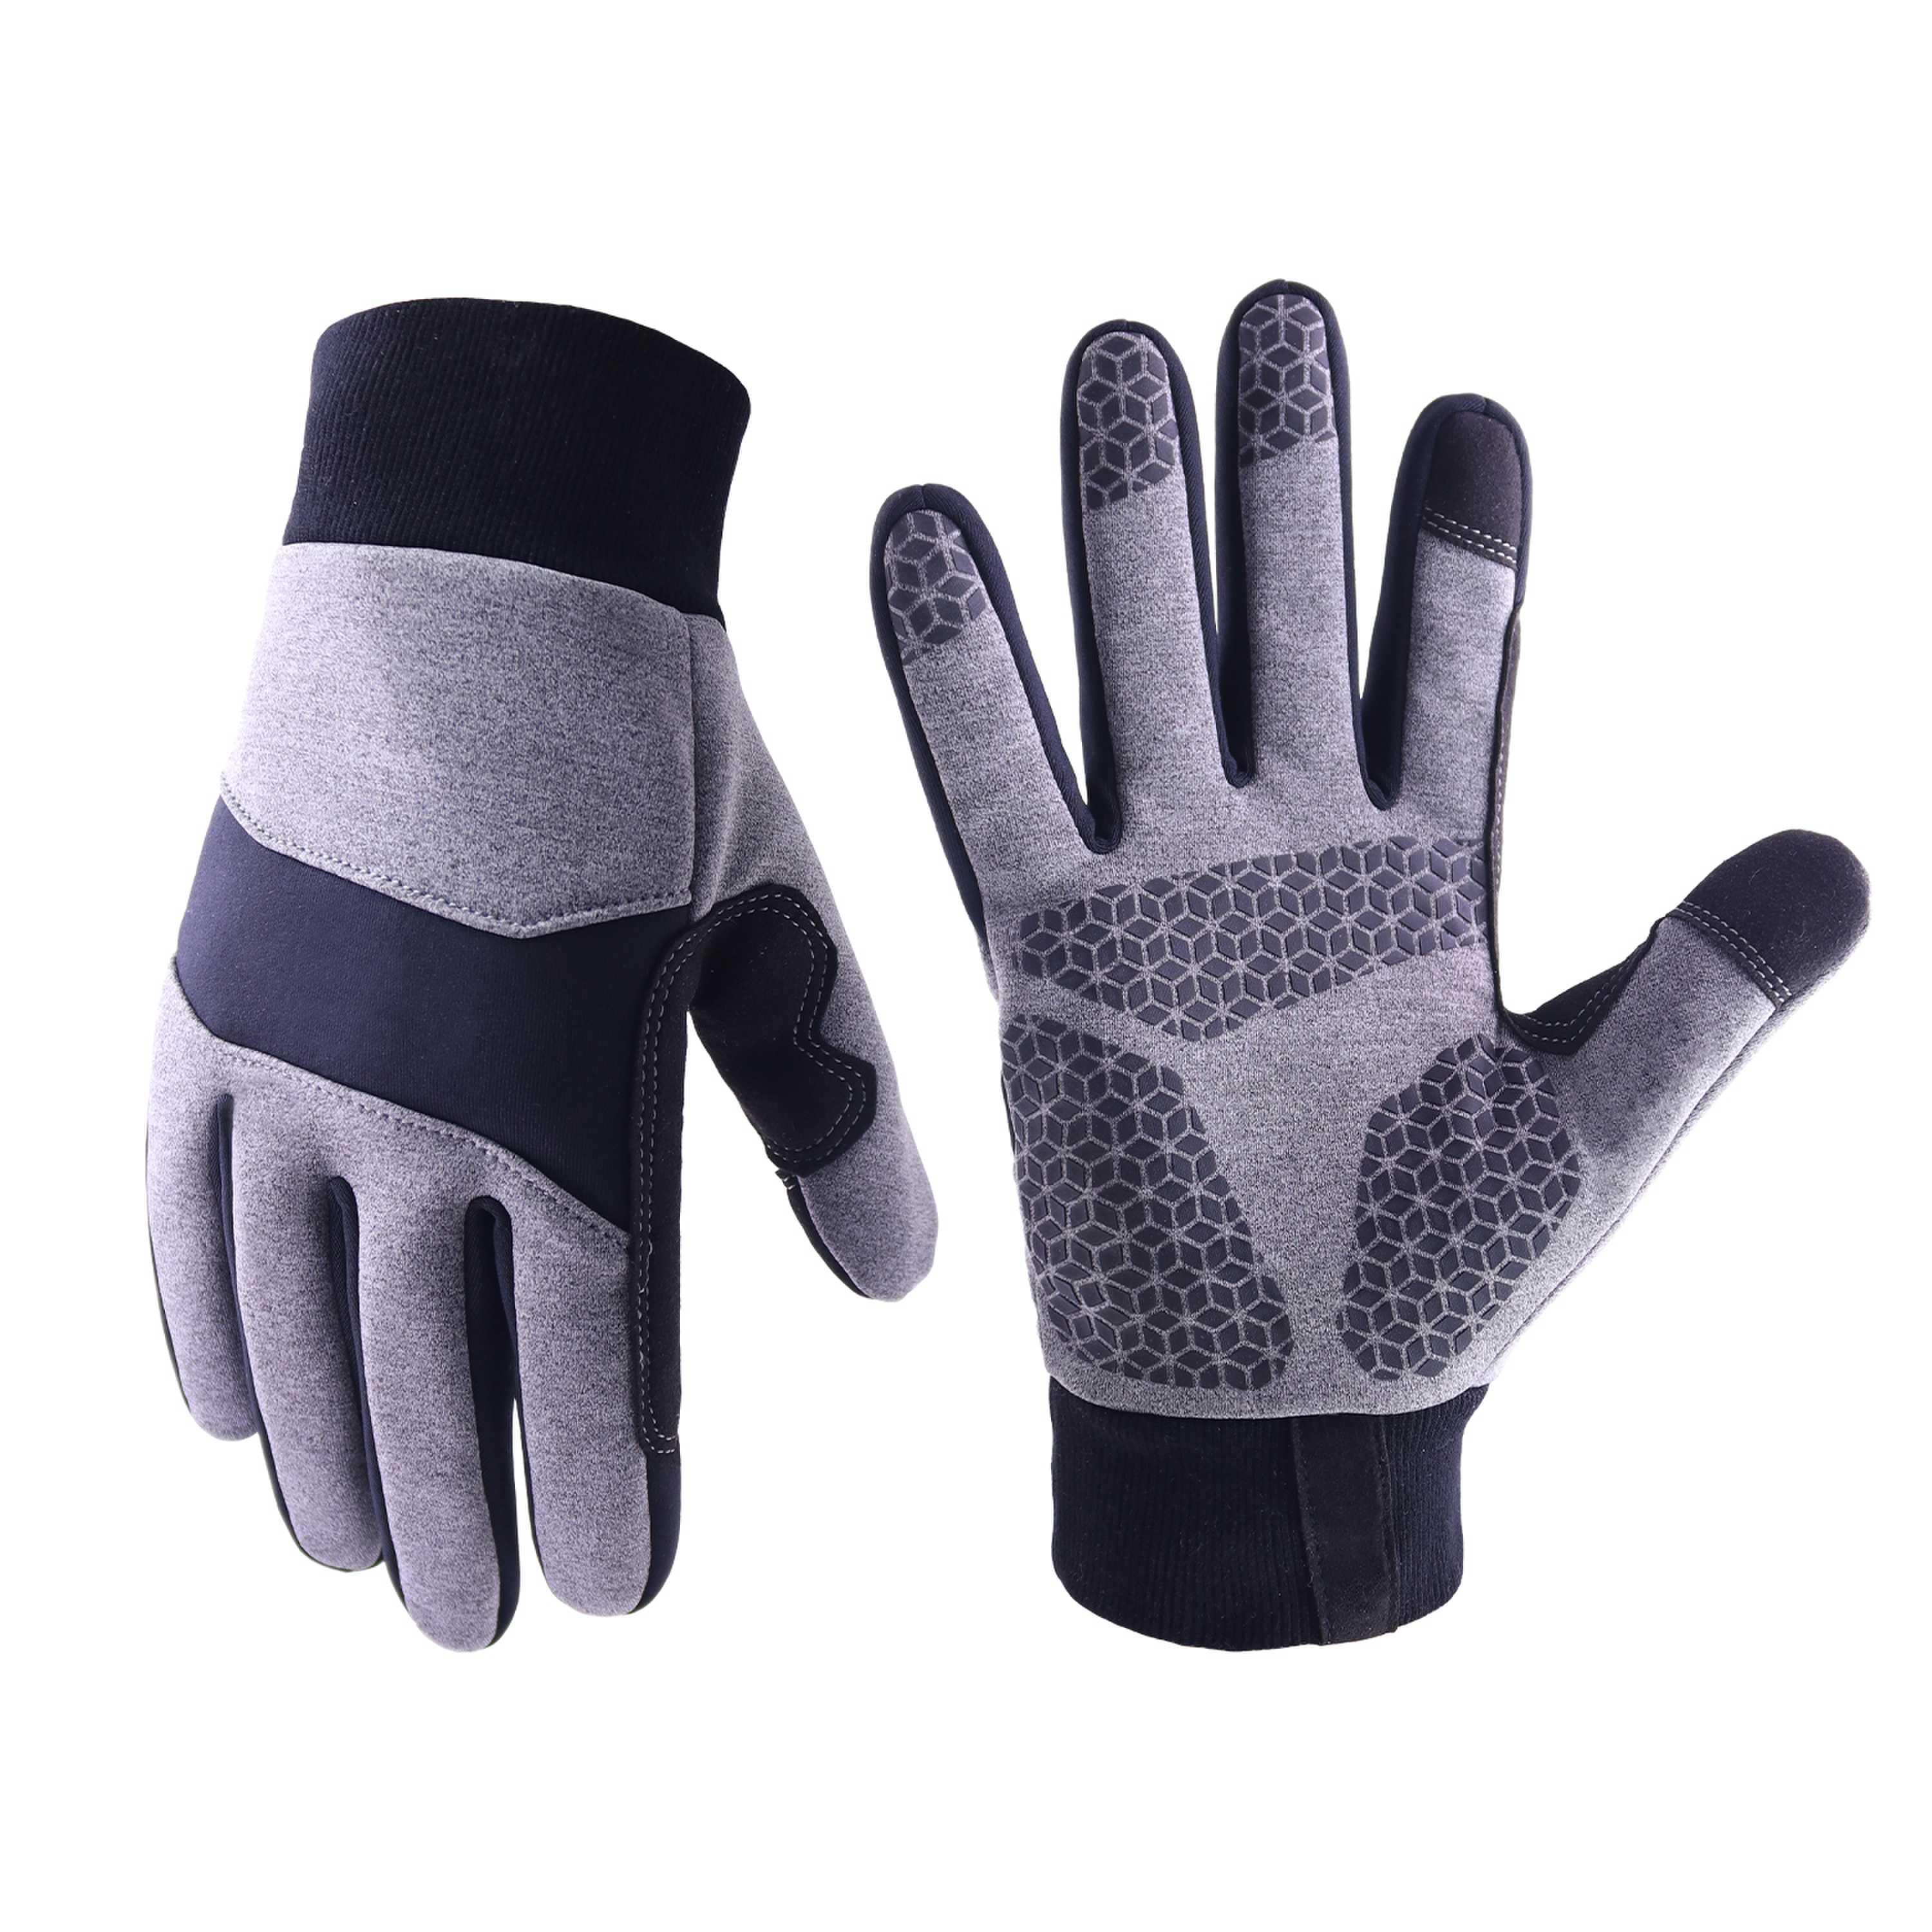 PRI  winter warm anti-slip touch screen industrial machinery light work gloves with silicone coating reinforced palm 6228